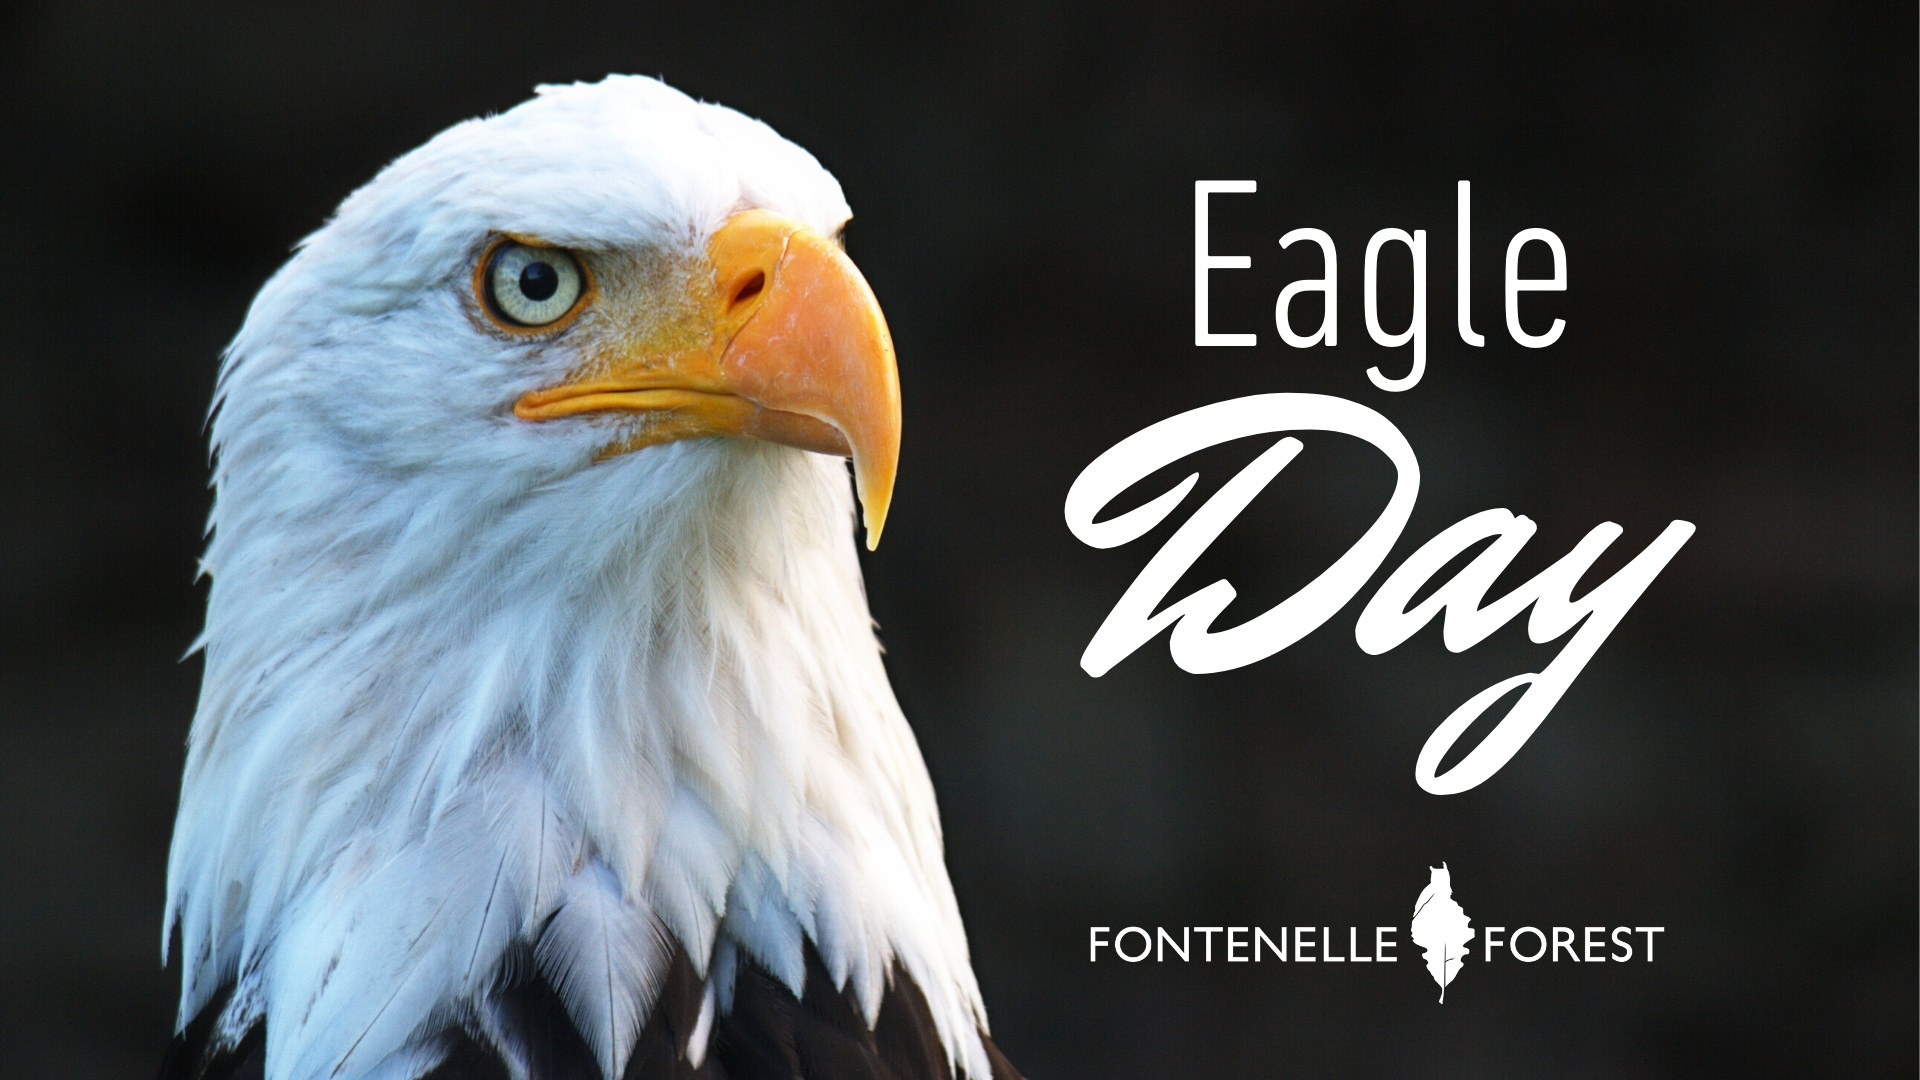 an eagle head with the text "Eagle Day" and the Fontenelle Forest logo